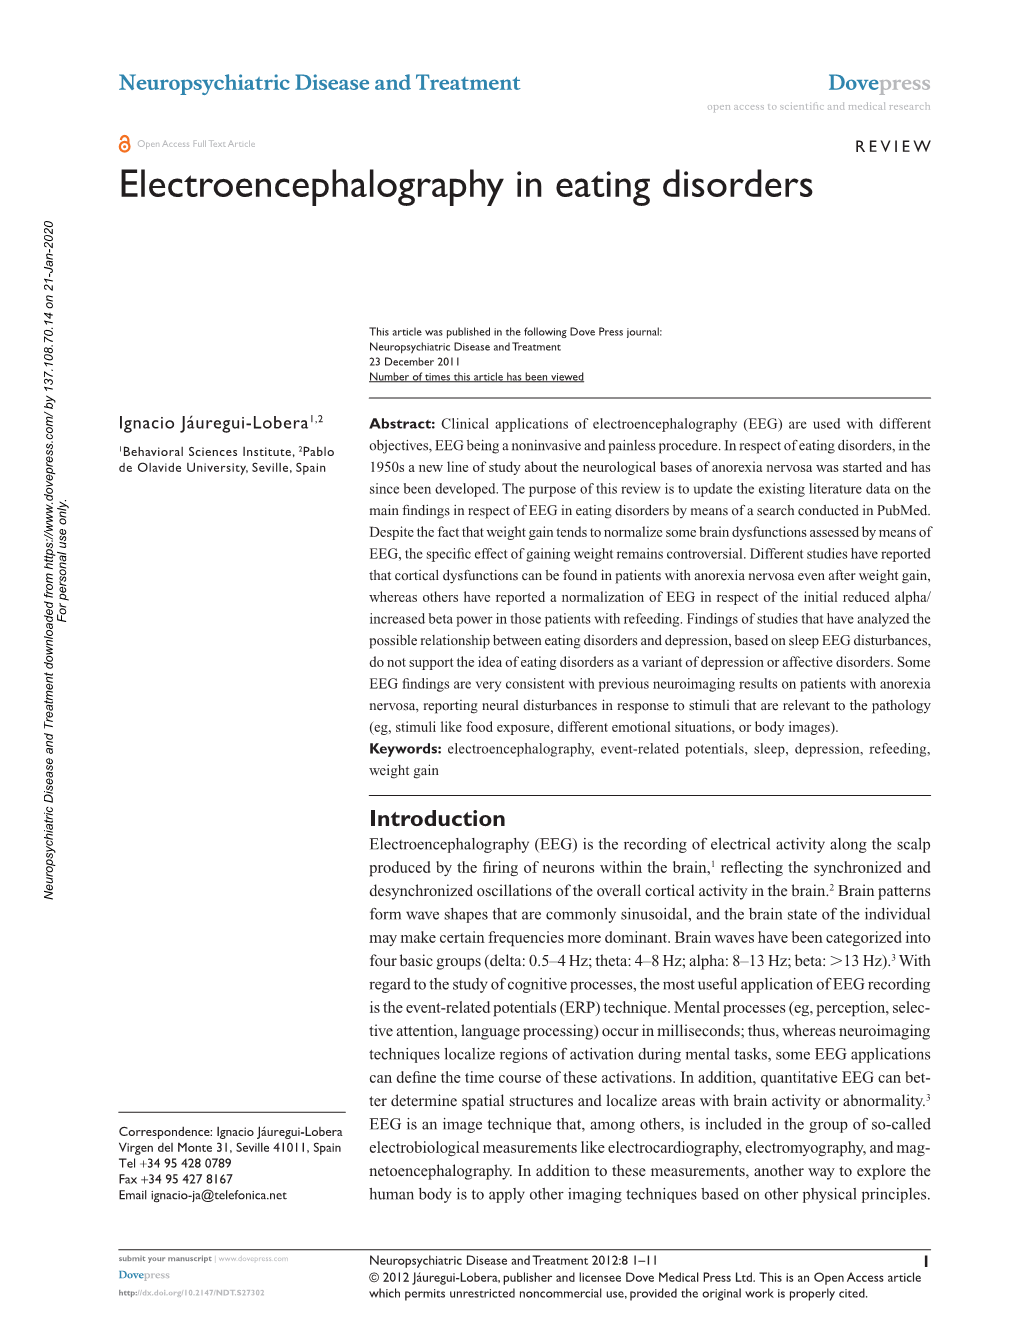 Electroencephalography in Eating Disorders